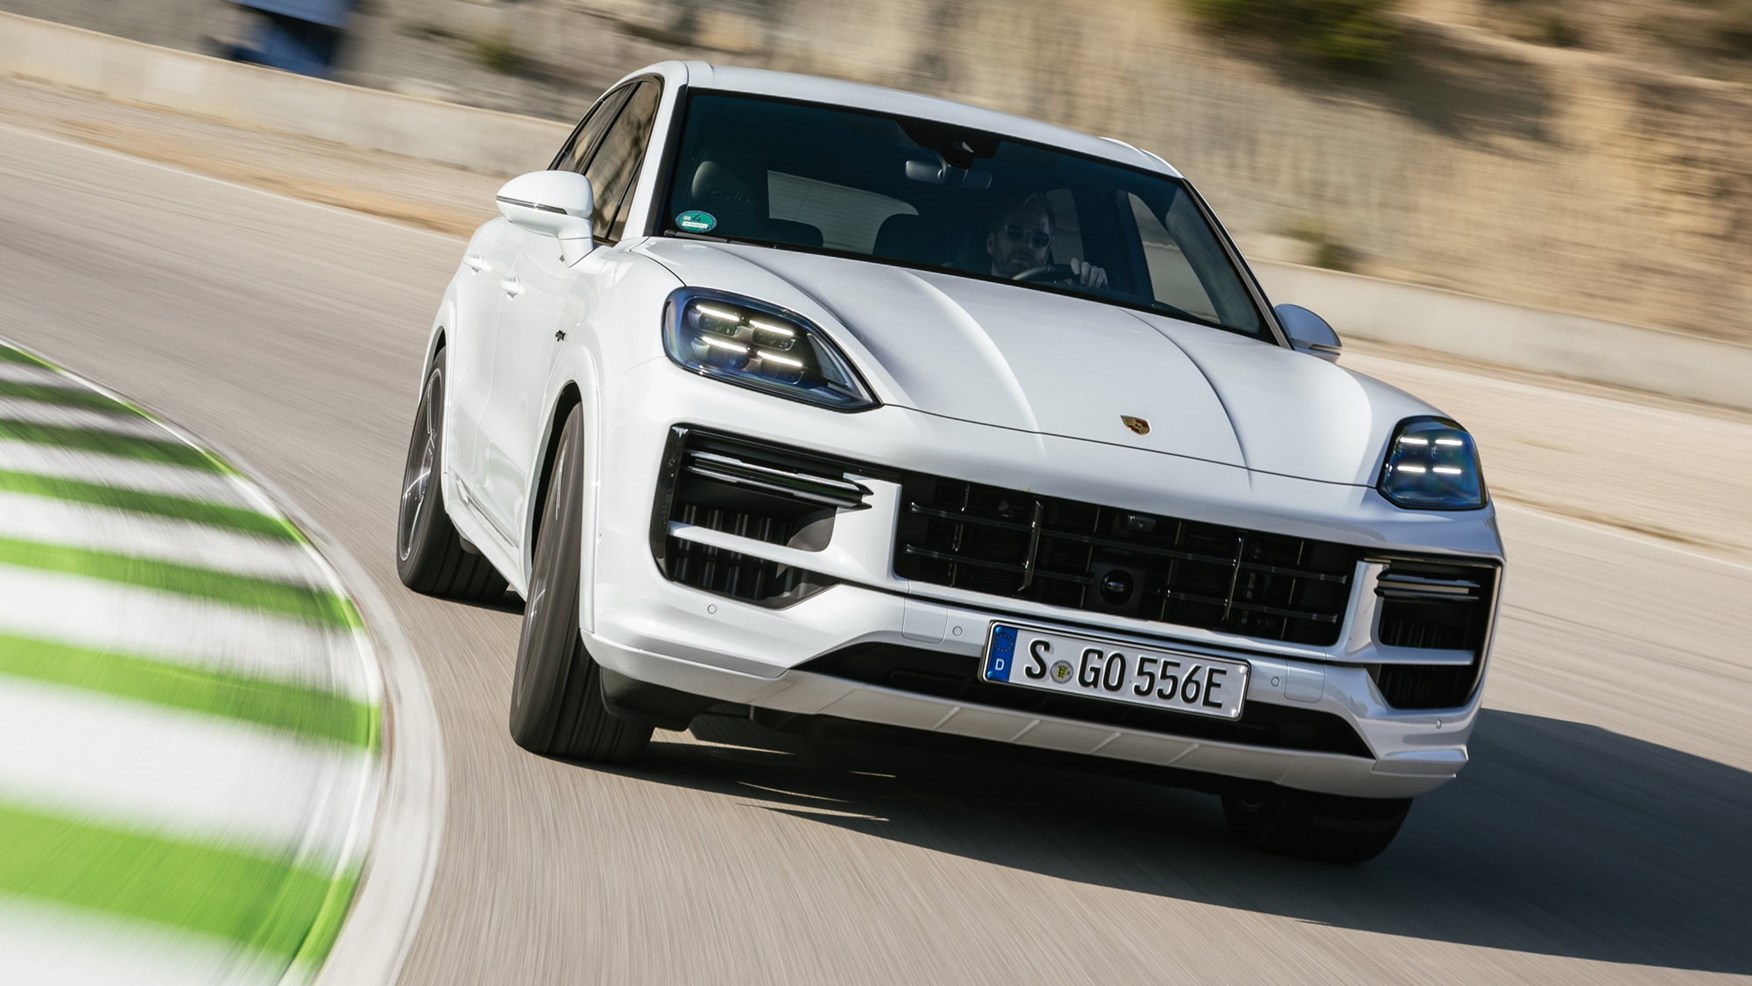 https://car-images.bauersecure.com/wp-images/164297/1752x1168/080-porsche-cayenne-turbo-e-hybrid-review-front-white-driving-circuit.jpg?mode=max&quality=90&scale=down